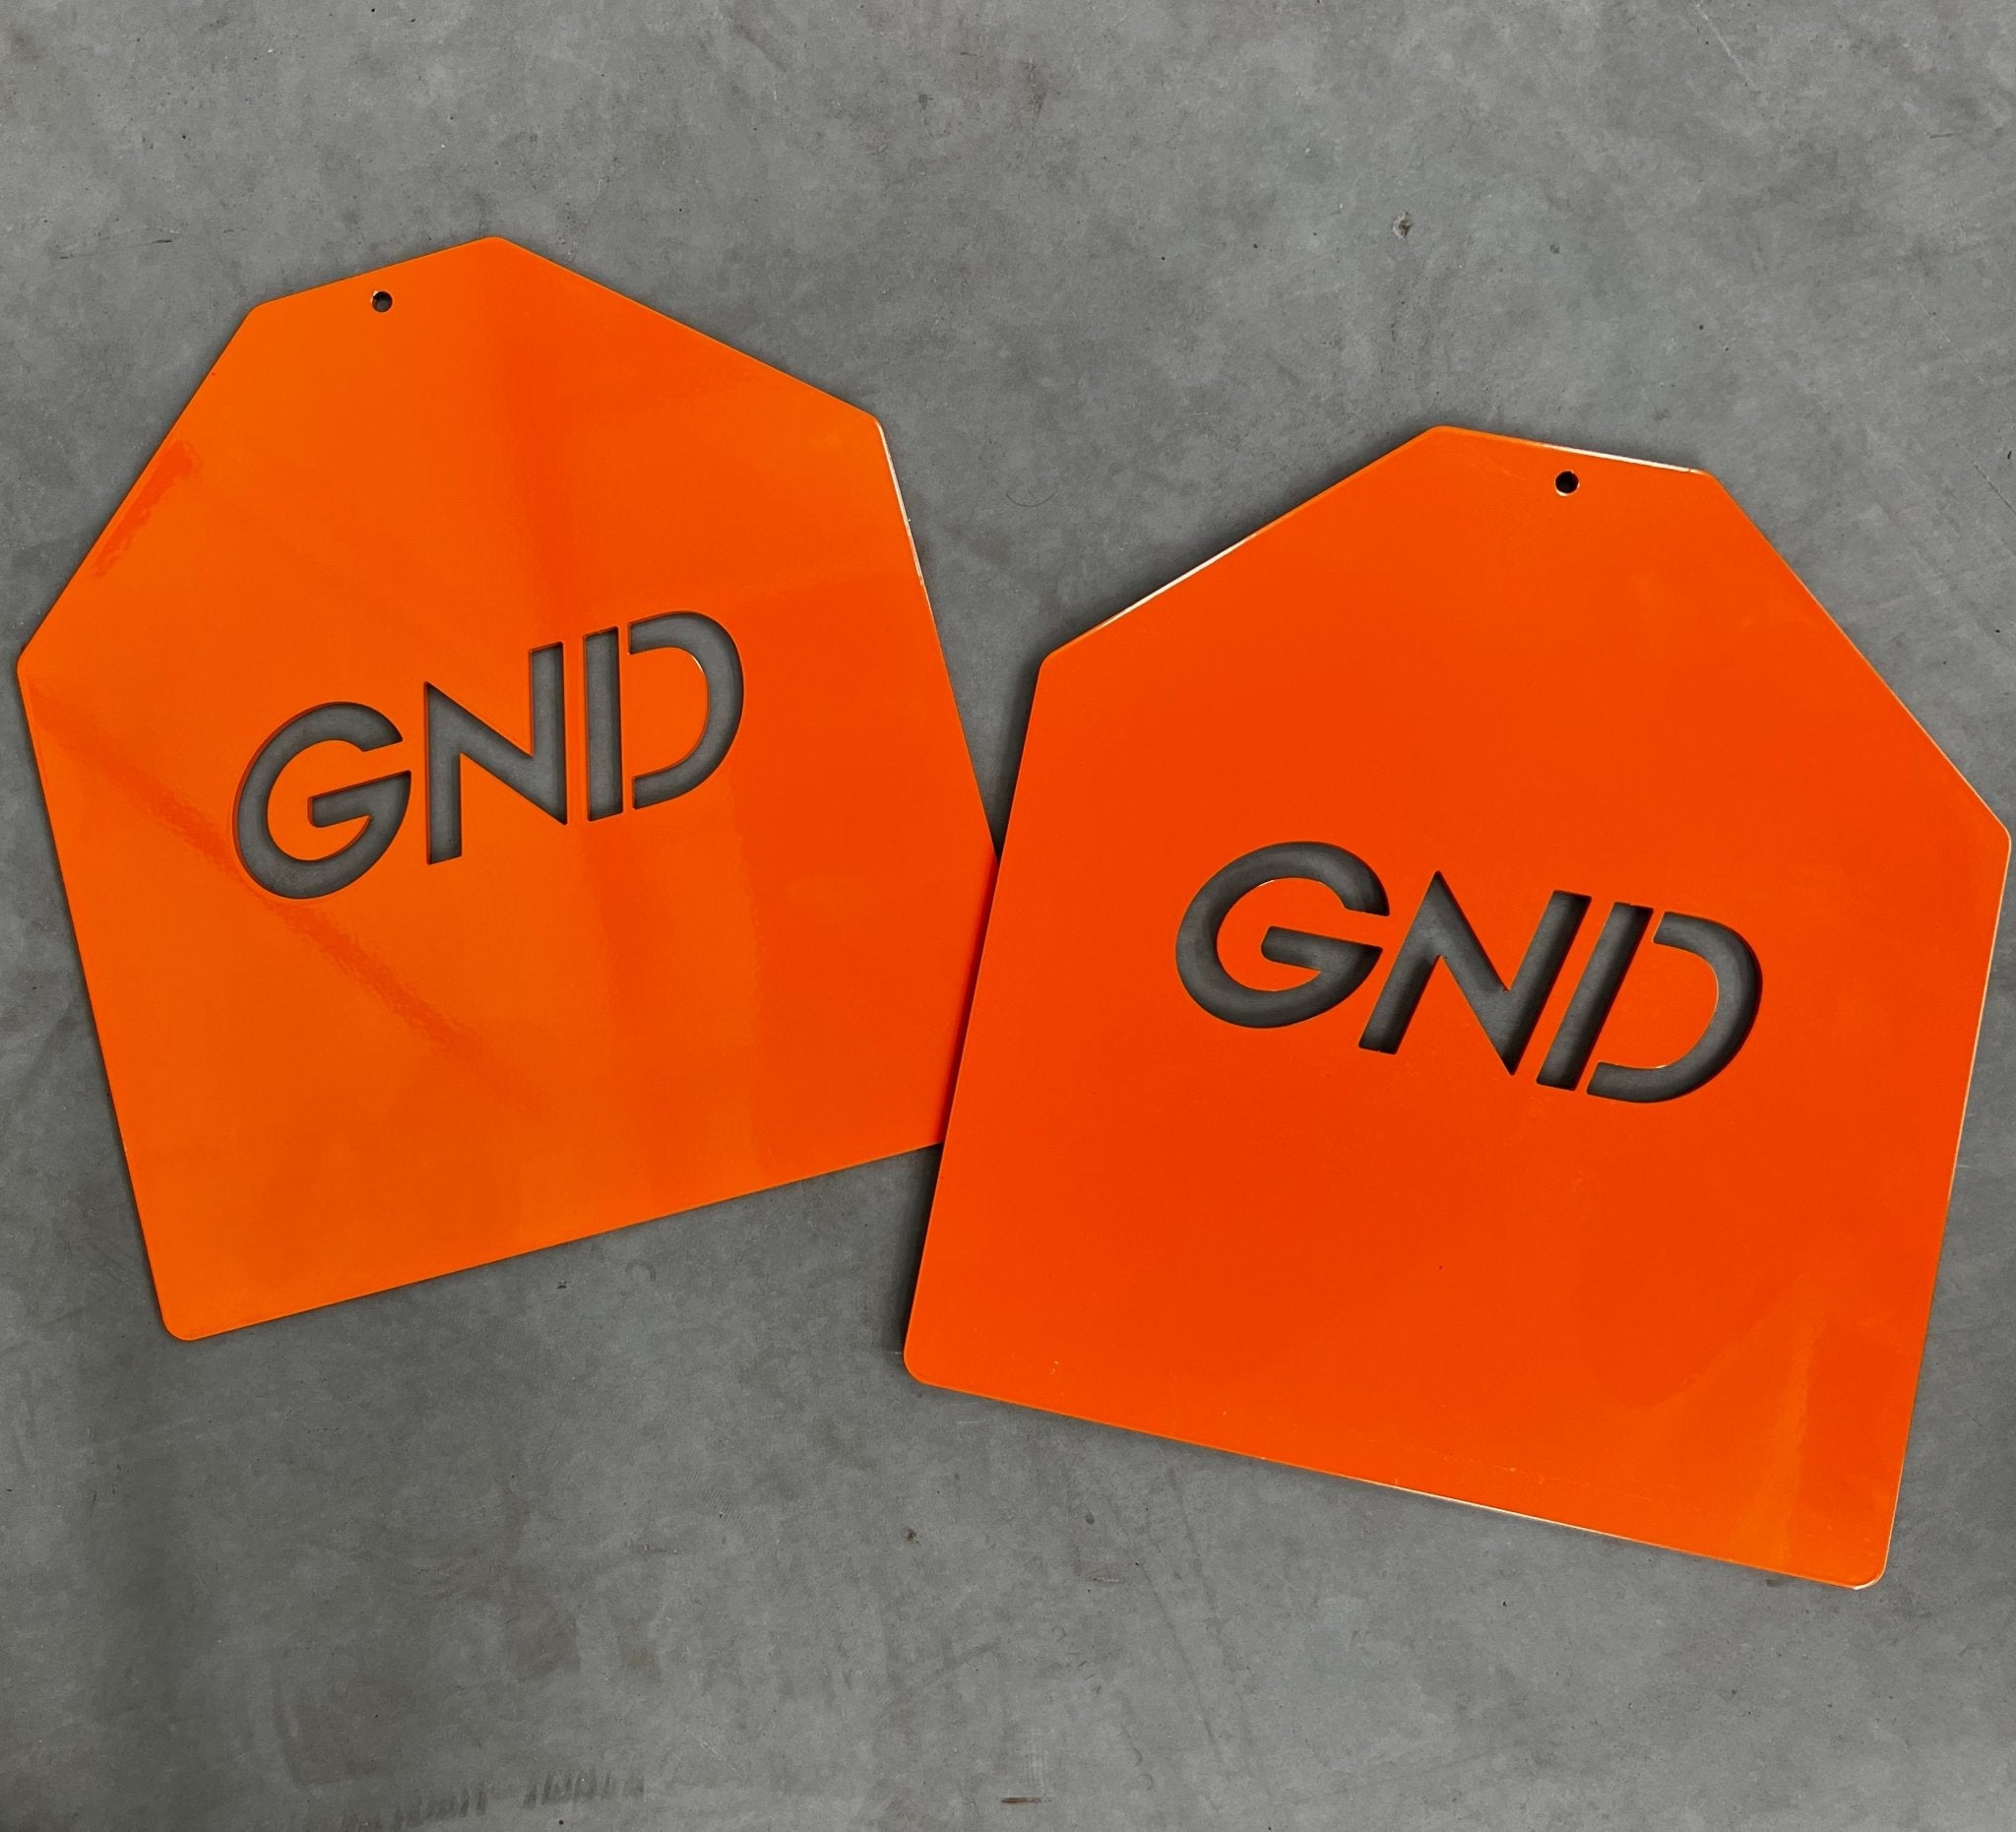 GND Weight Vest // Black - Weighted Vest- GND Fitness